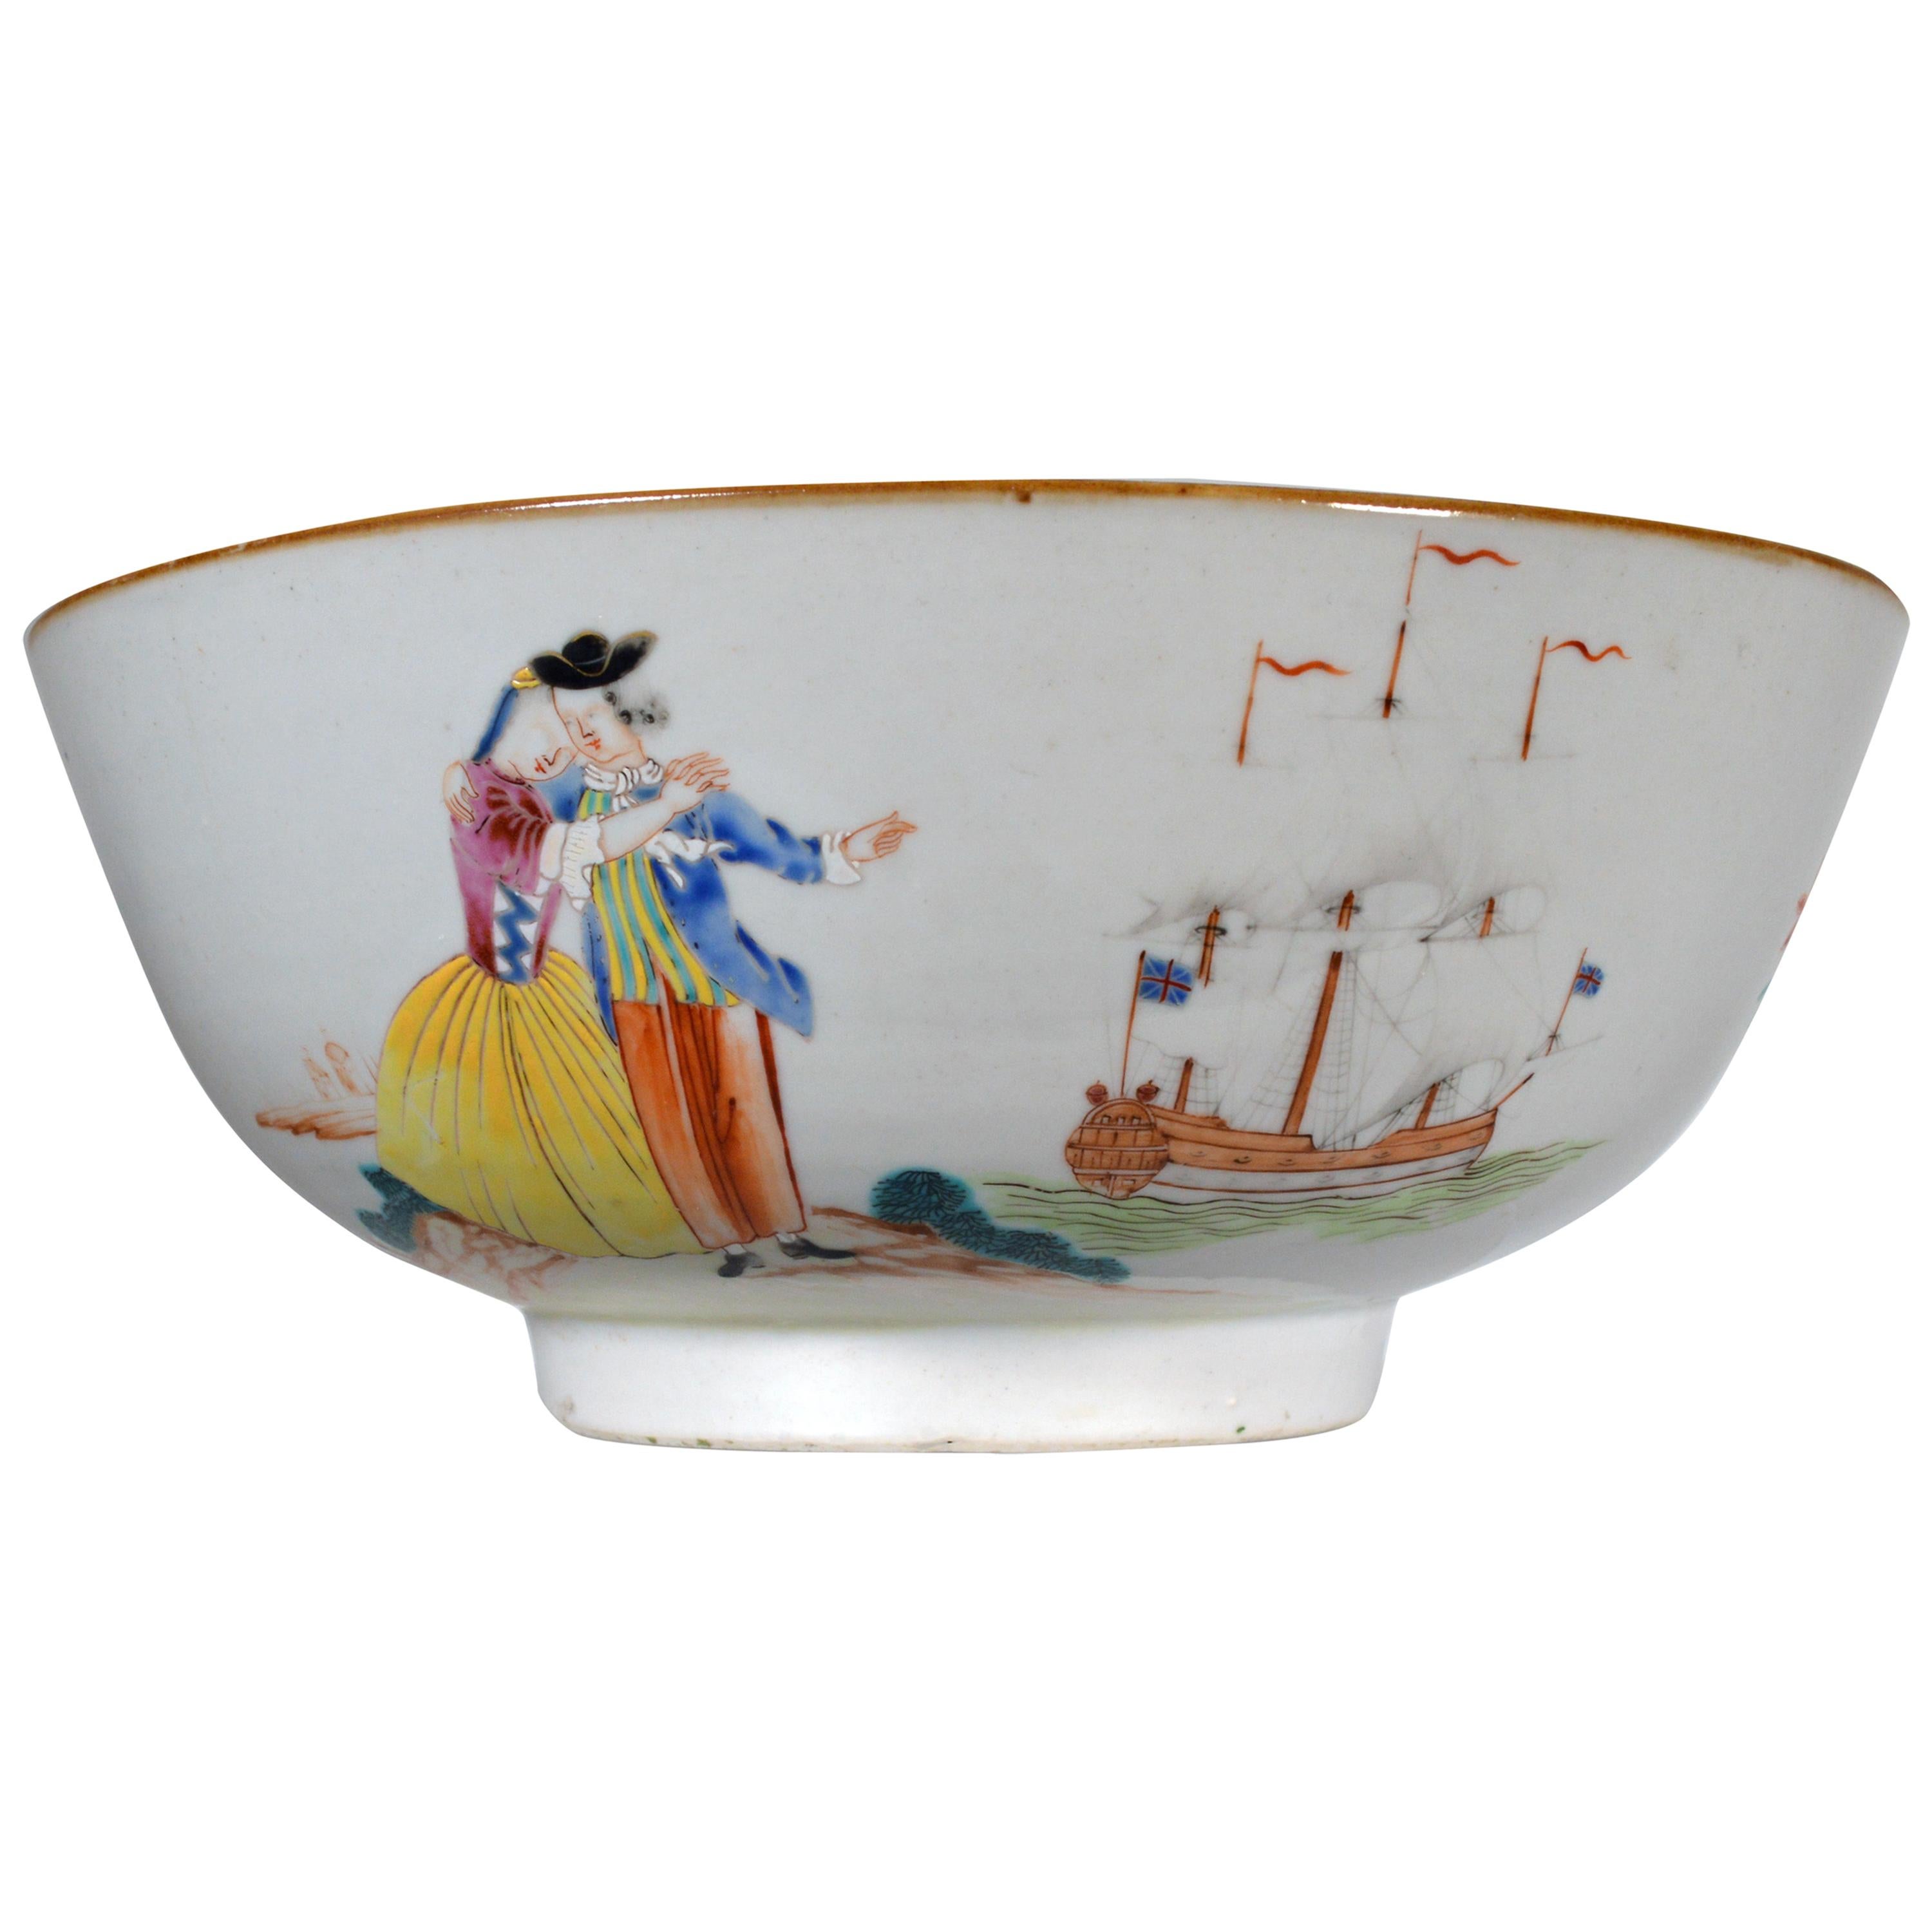 Chinese Export Porcelain European-subject Punch Bowl,
Sailor's Farewell and Return Bowl with Royal Navy Ship,
Circa 1765-75

The Chinese Export porcelain bowl has two images of a sailor and his wife, one known as the sailor's farewell and the